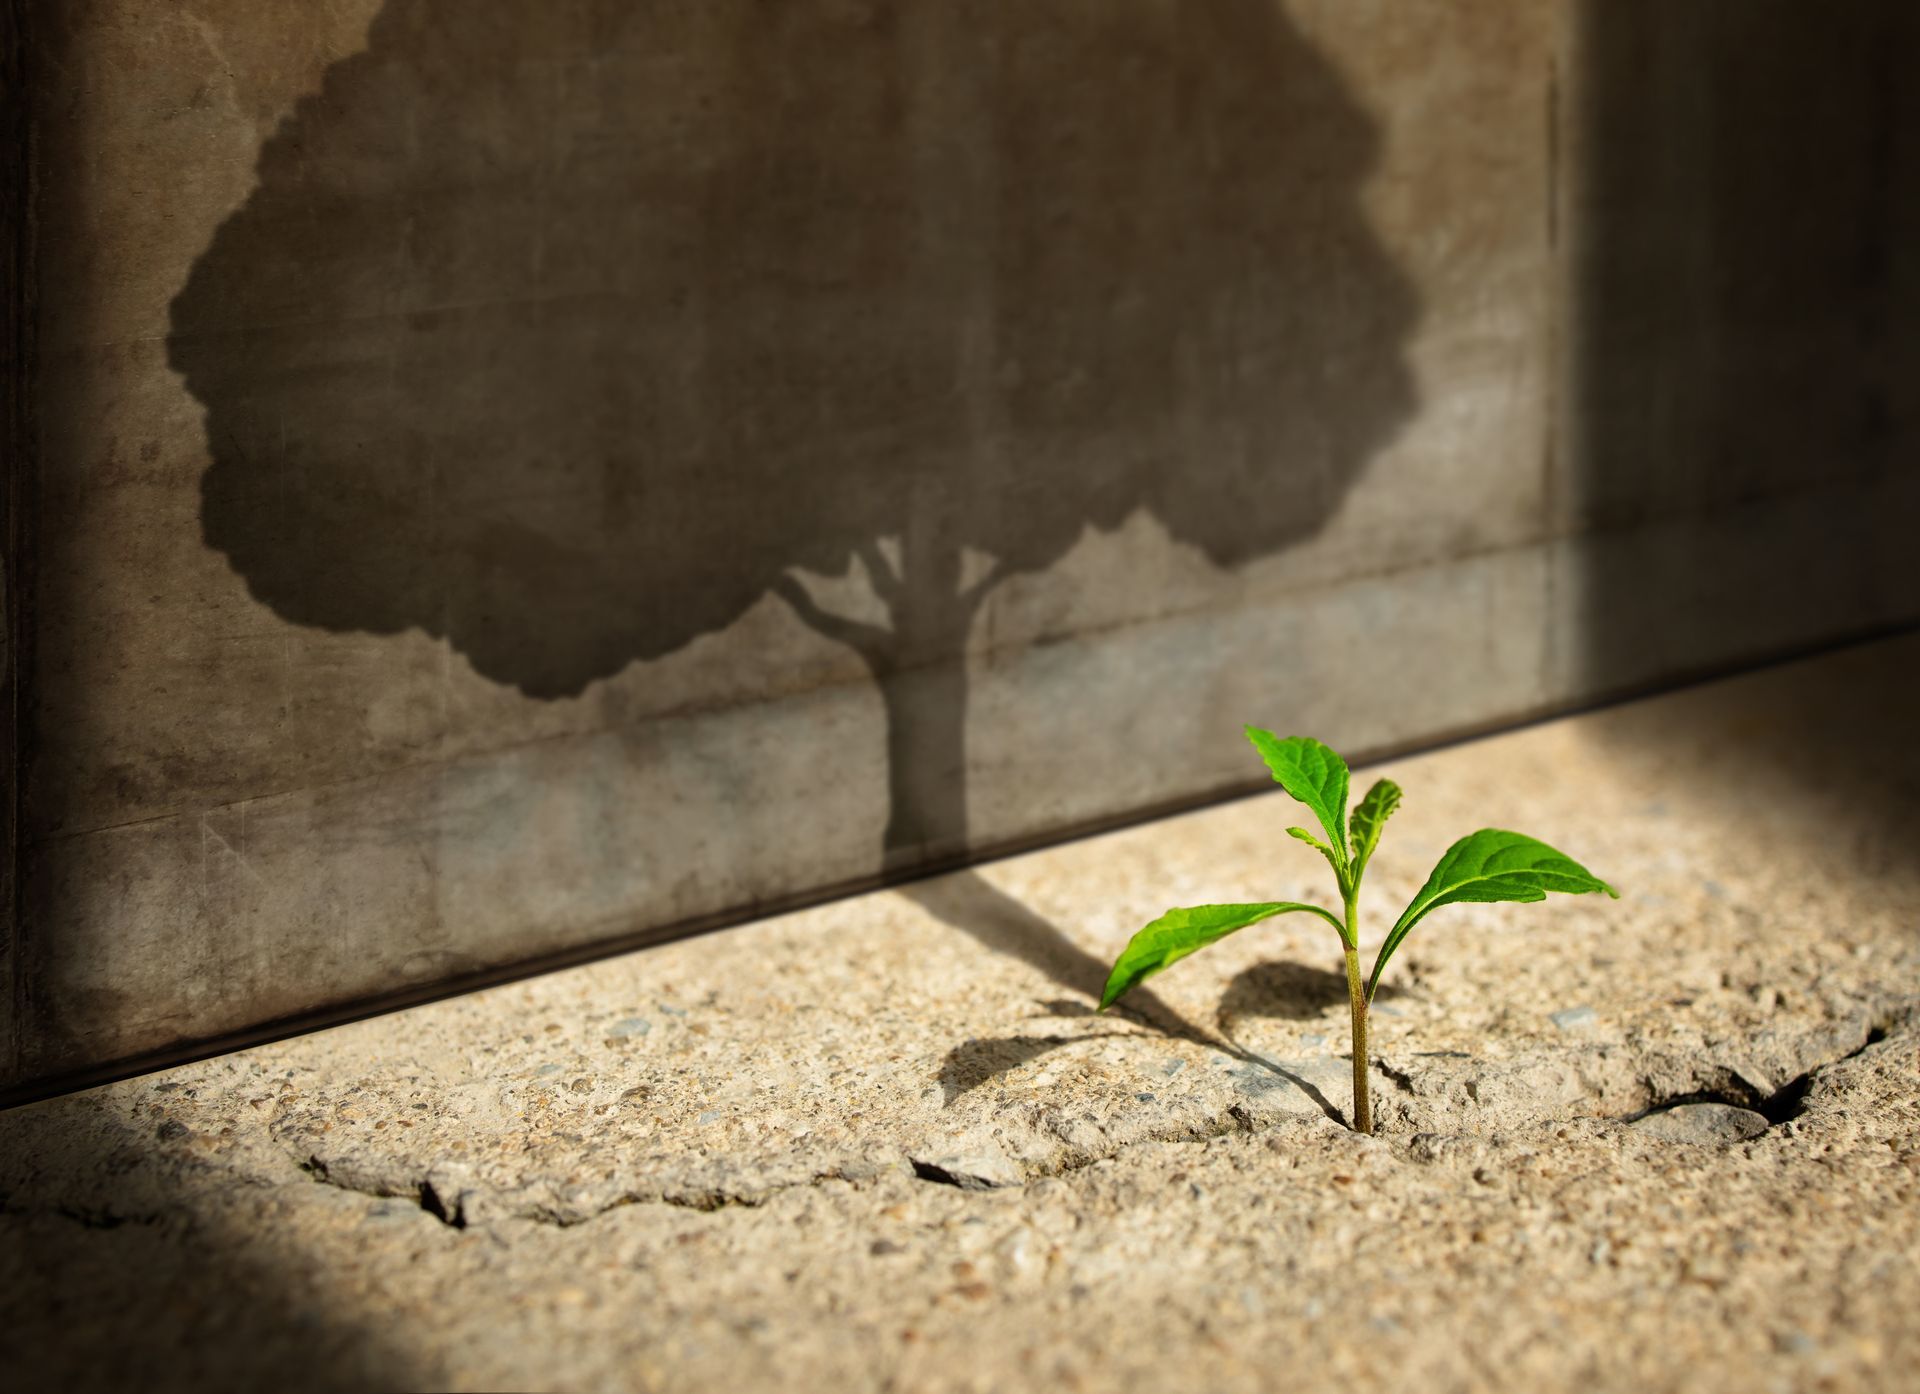 A sprout casting a shadow onto a wall that appears to be a fully grown tree.